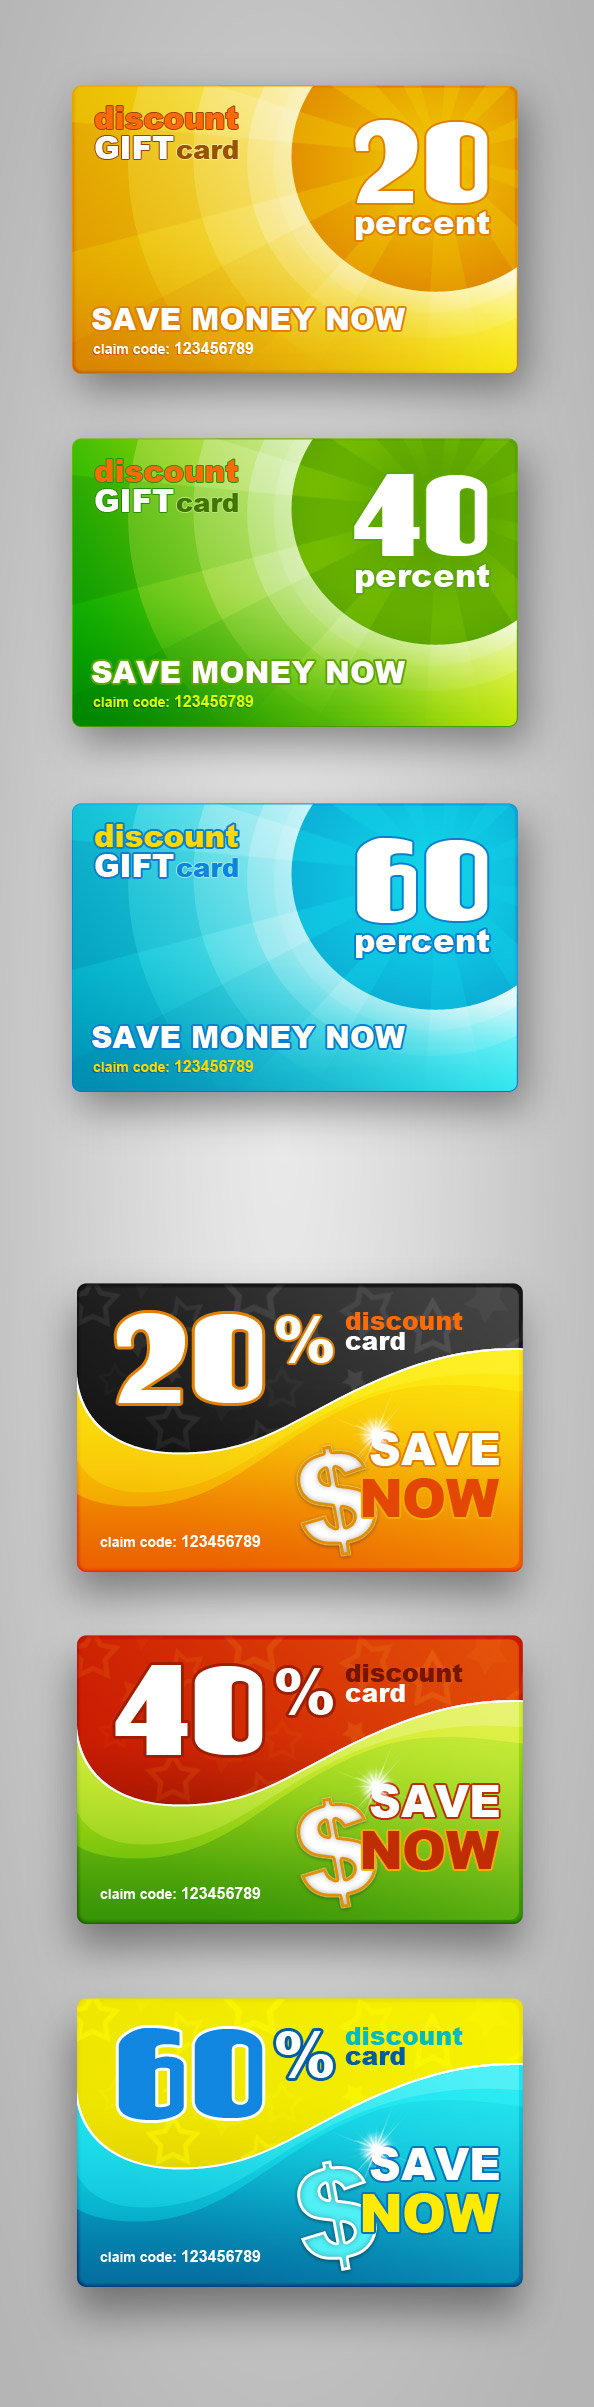 Discount Gift Cards PSD